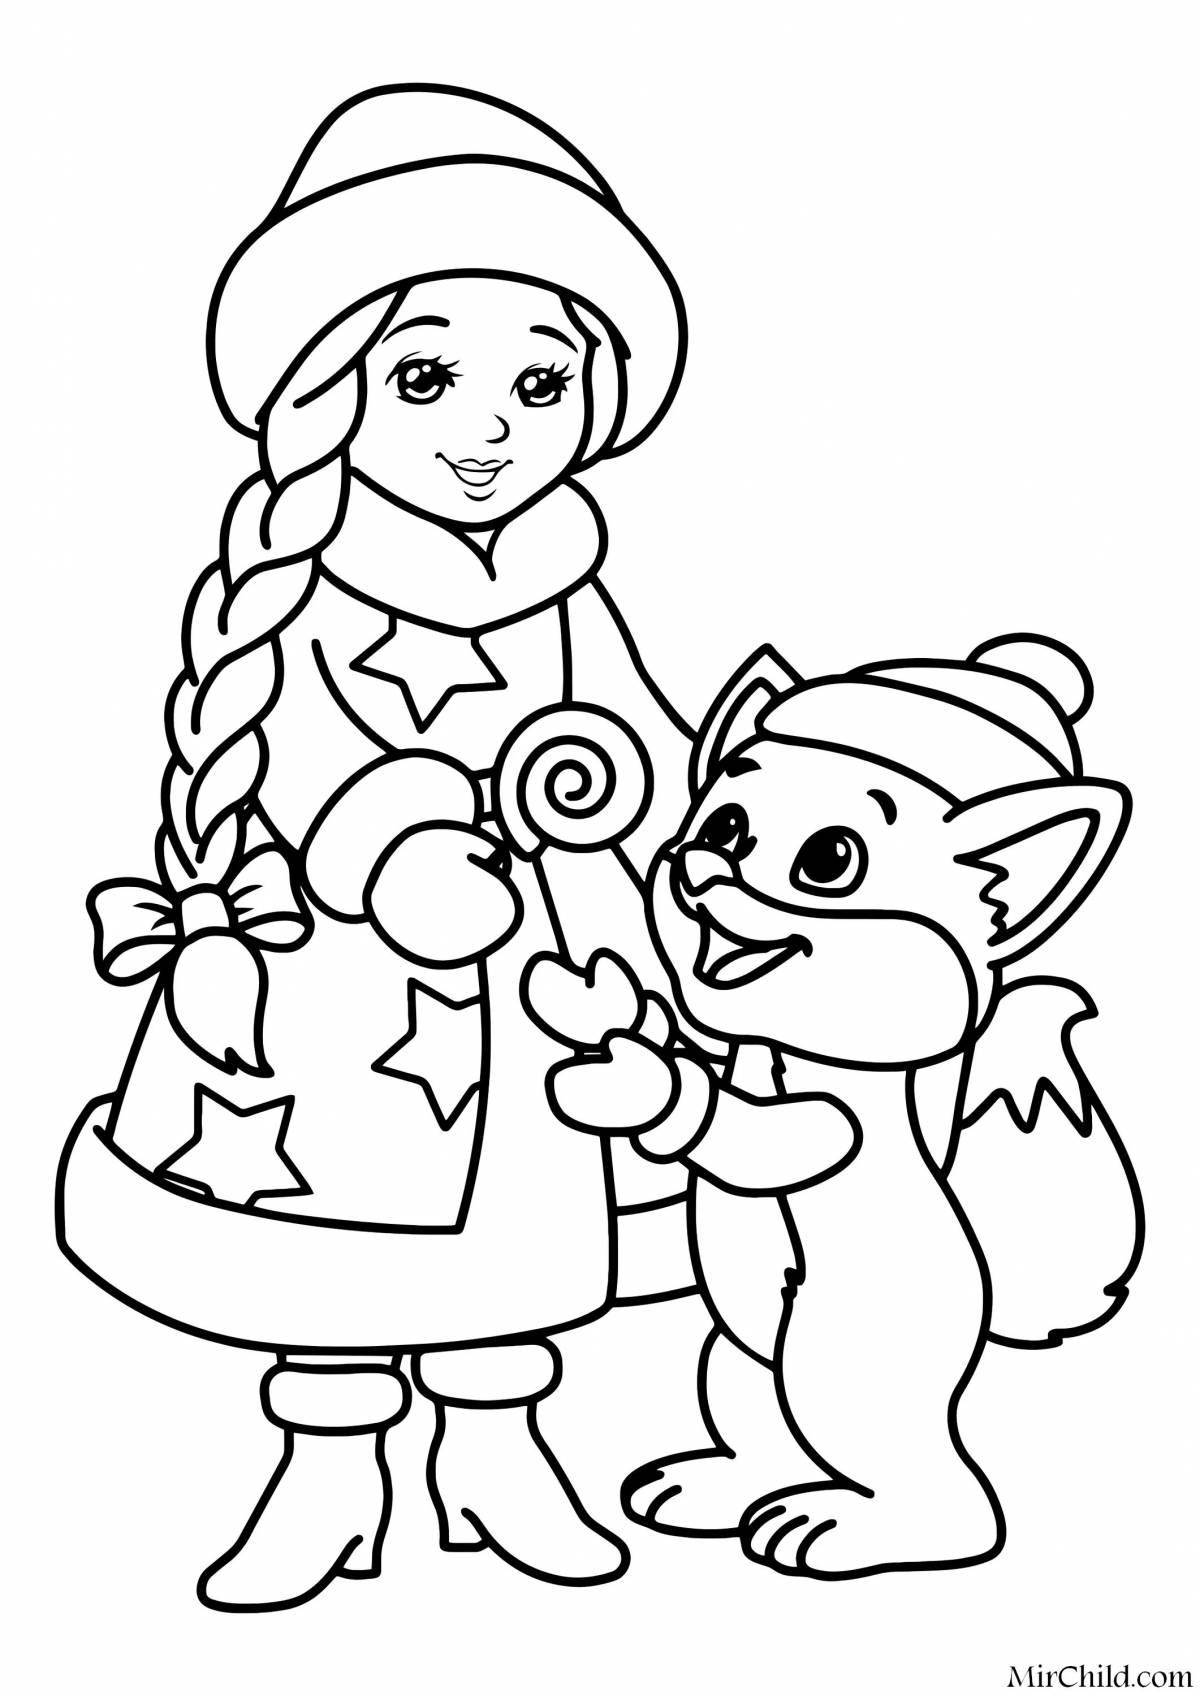 Coloring page funny santa claus and animals